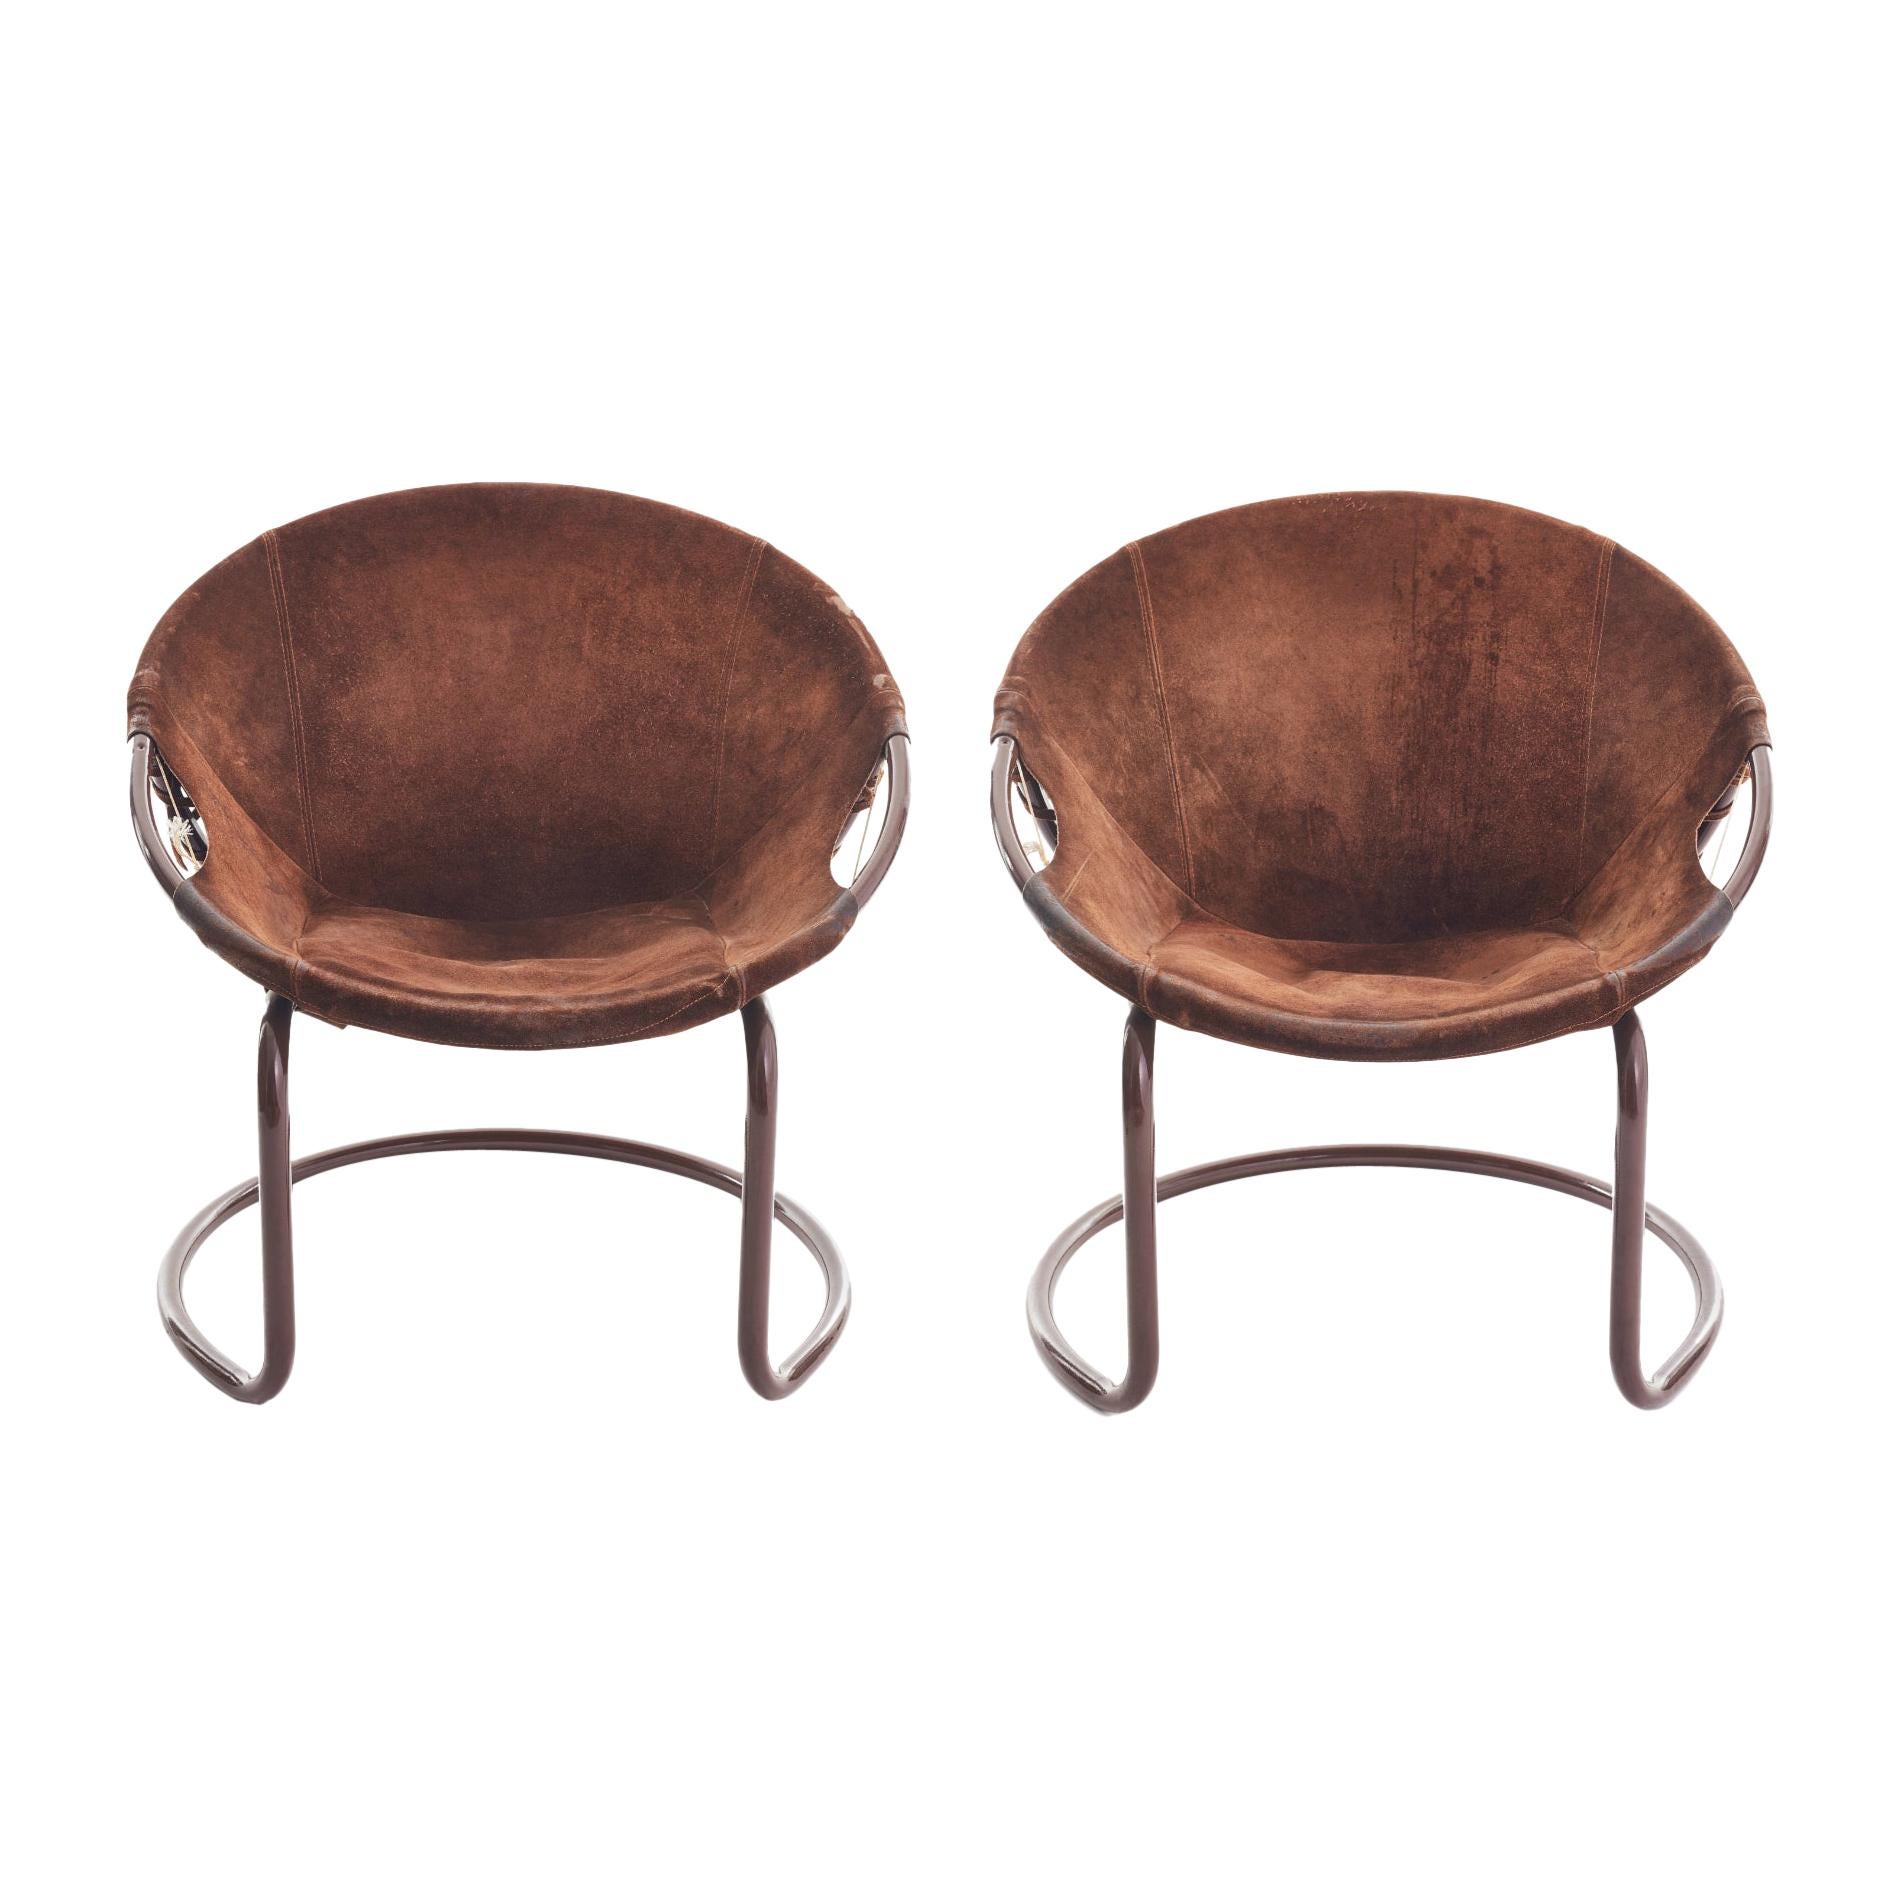 Midcentury German Circle Chairs by Lusch Erzeugnis in Suede